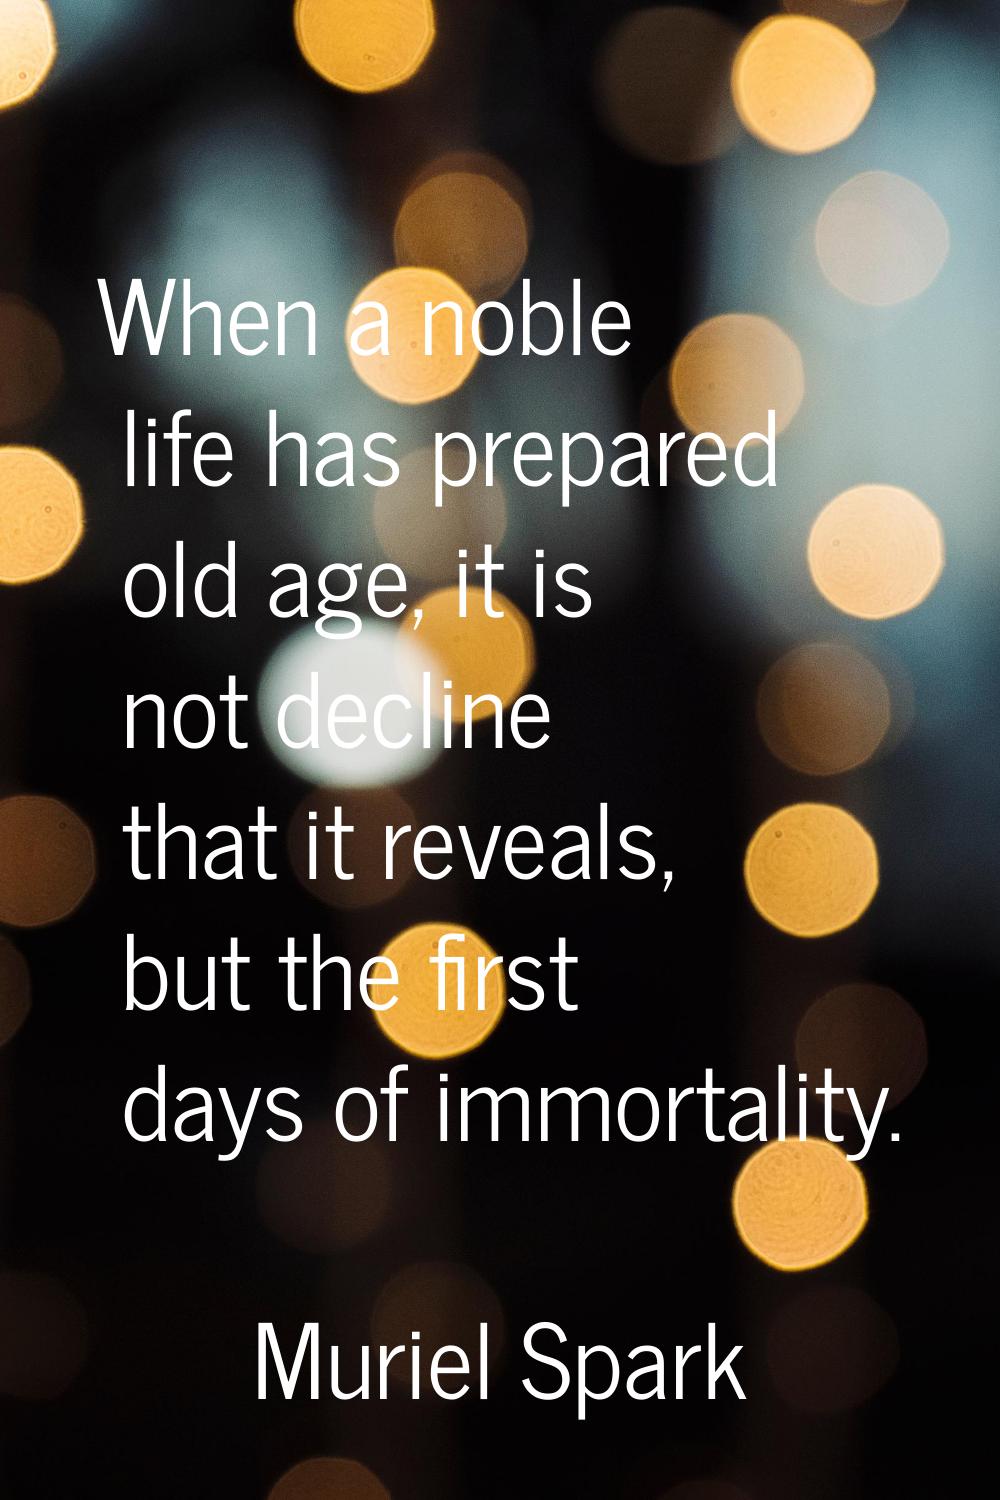 When a noble life has prepared old age, it is not decline that it reveals, but the first days of im